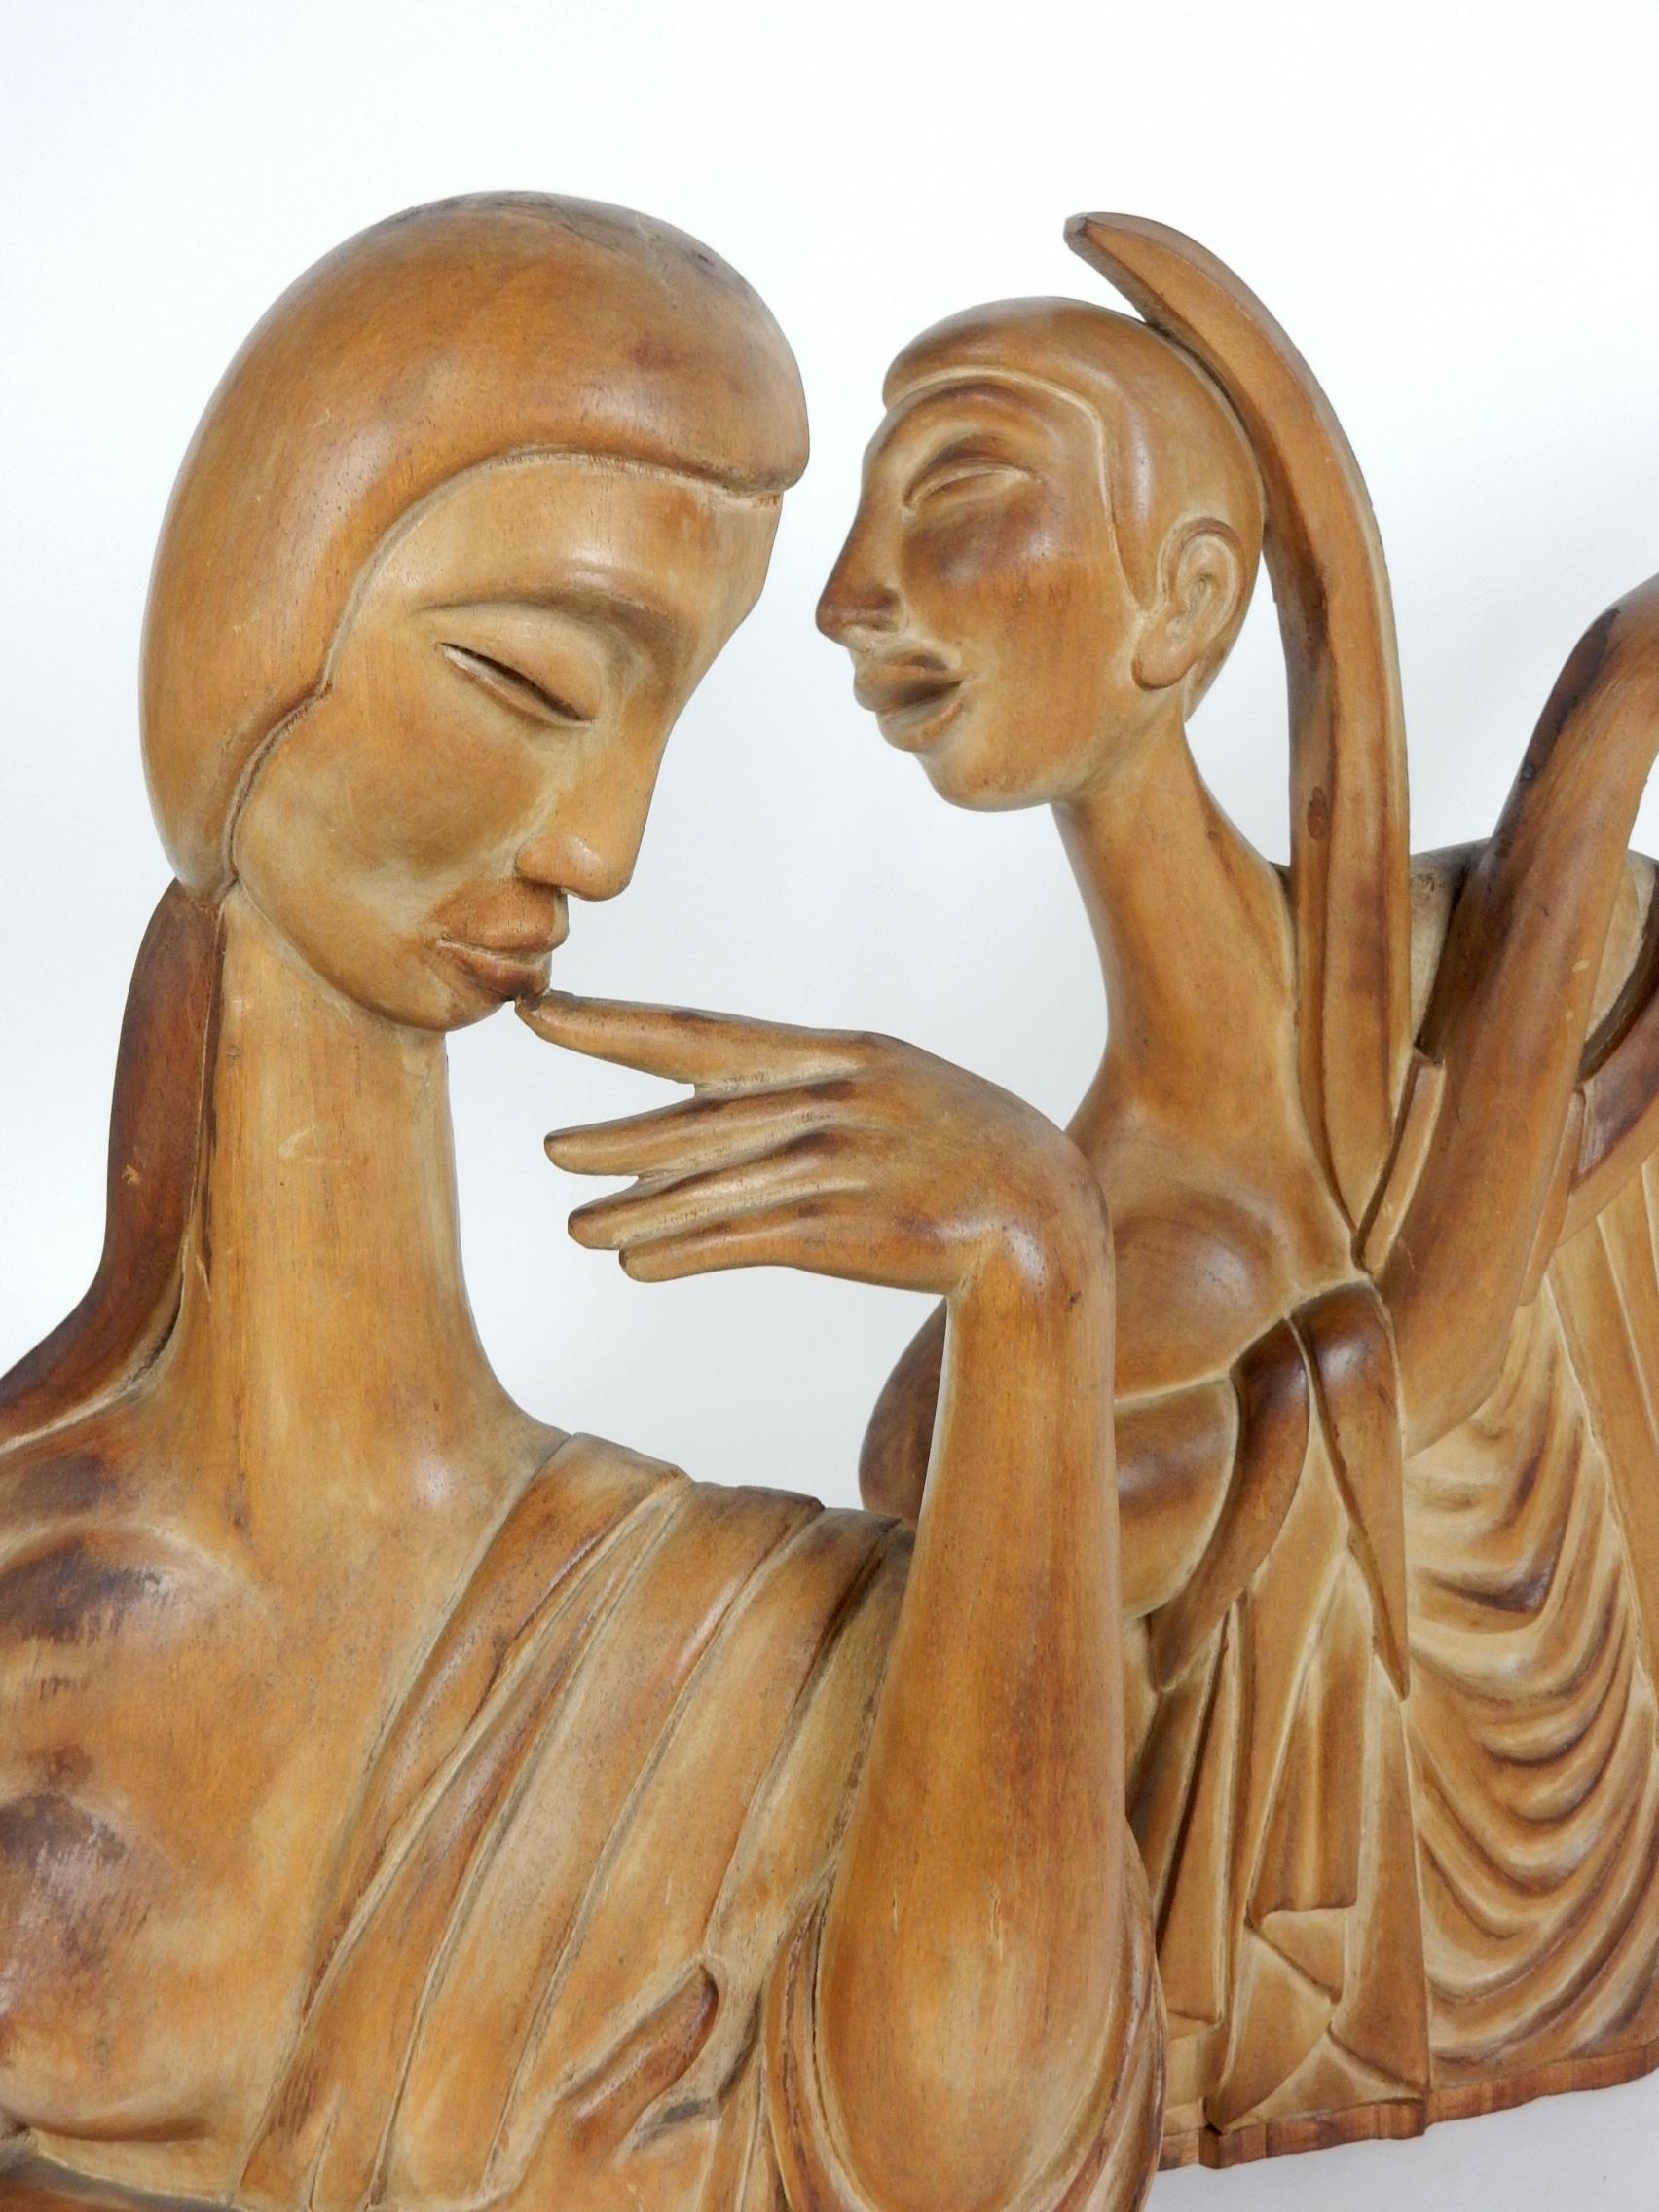 Large Art Deco era figural wood sculptures 
Of a stylistic woman and man playing a Lyre.
Each stands 19